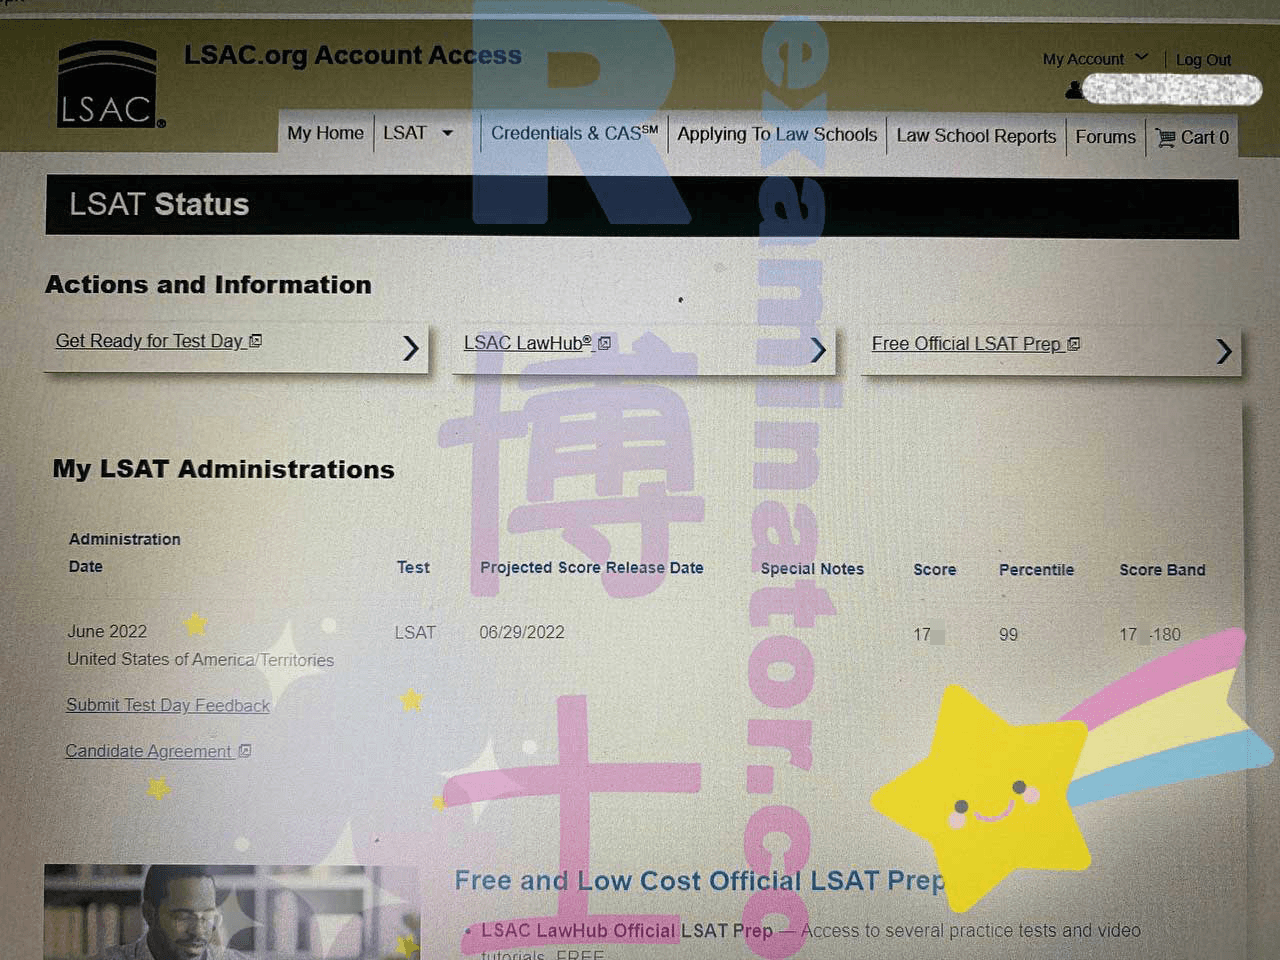 17X on June LSAT! 🎉 As a token of appreciation, the client tipped us a generously🤝